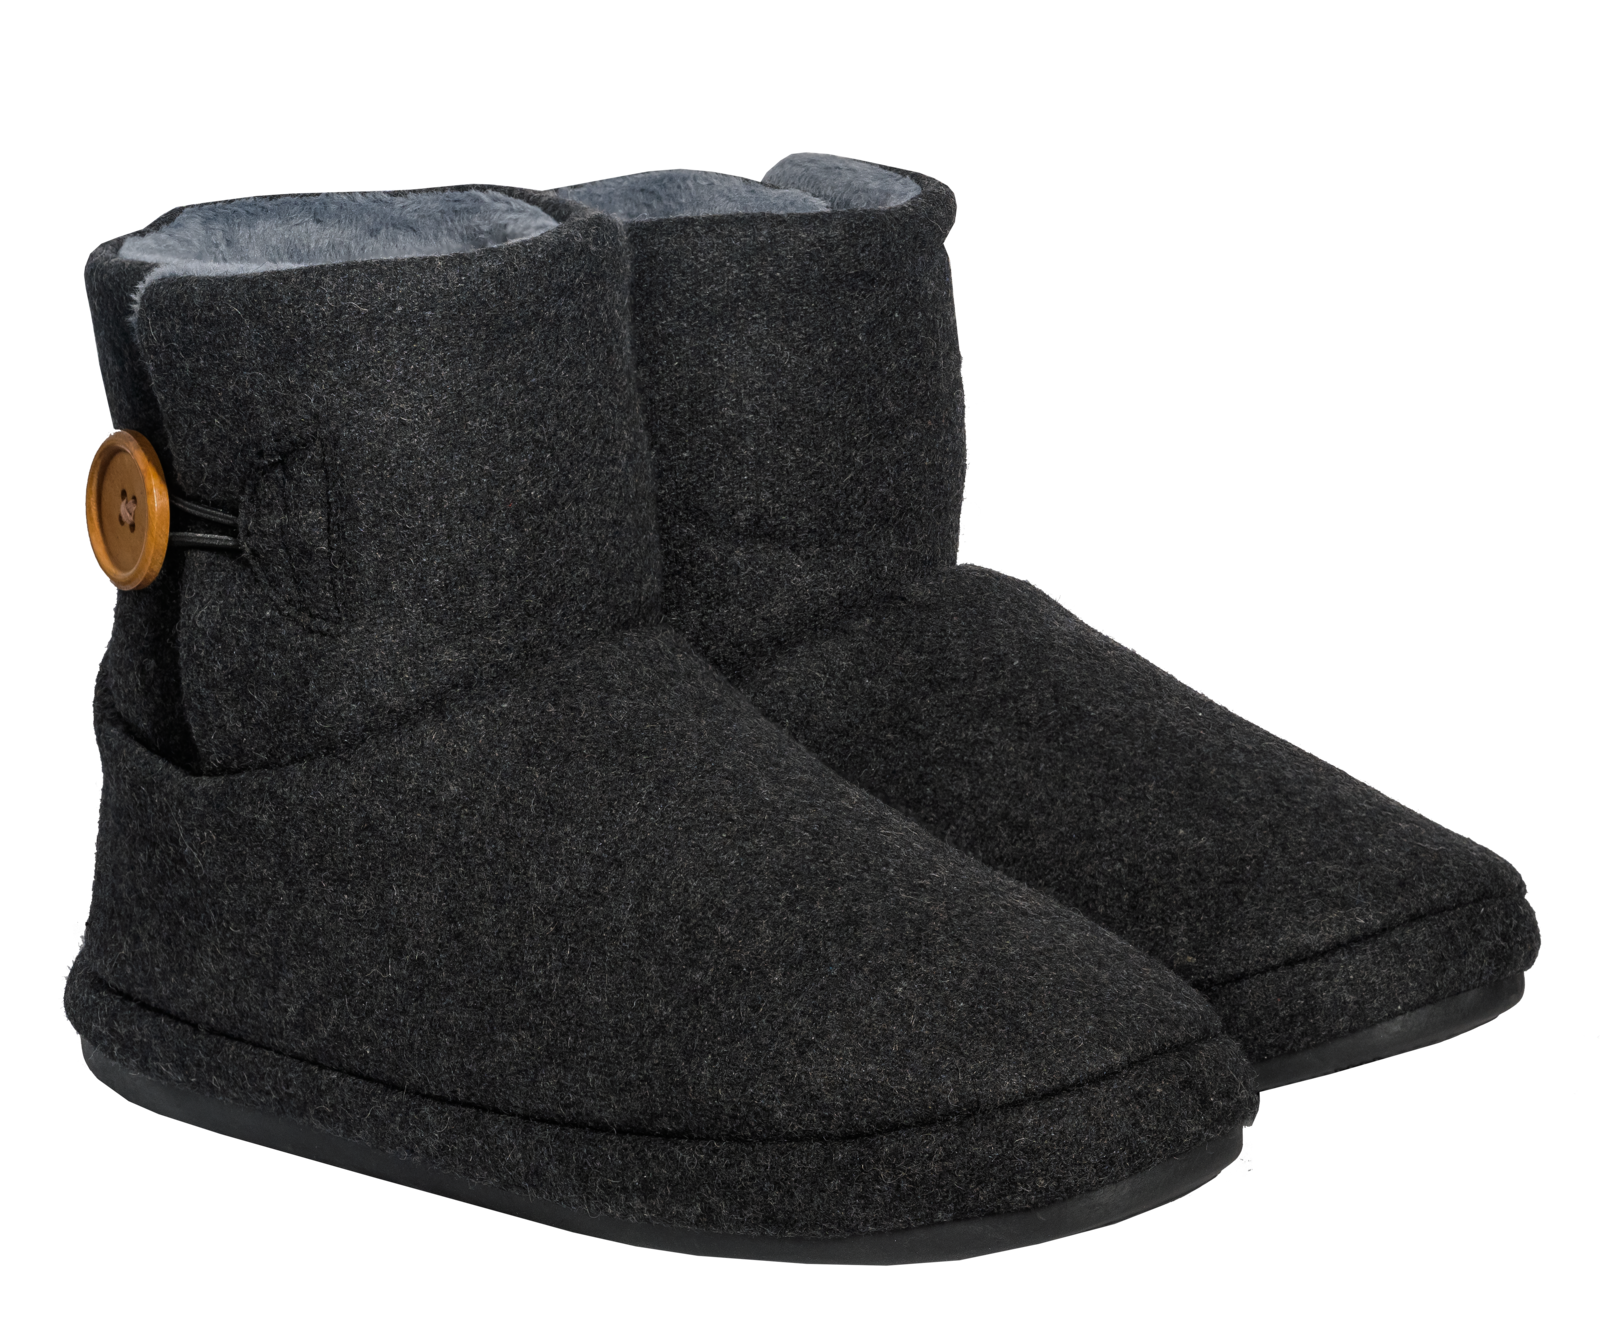 Archline Orthotic UGG Boots Slippers Arch Support Warm Orthopedic Shoes - Charcoal